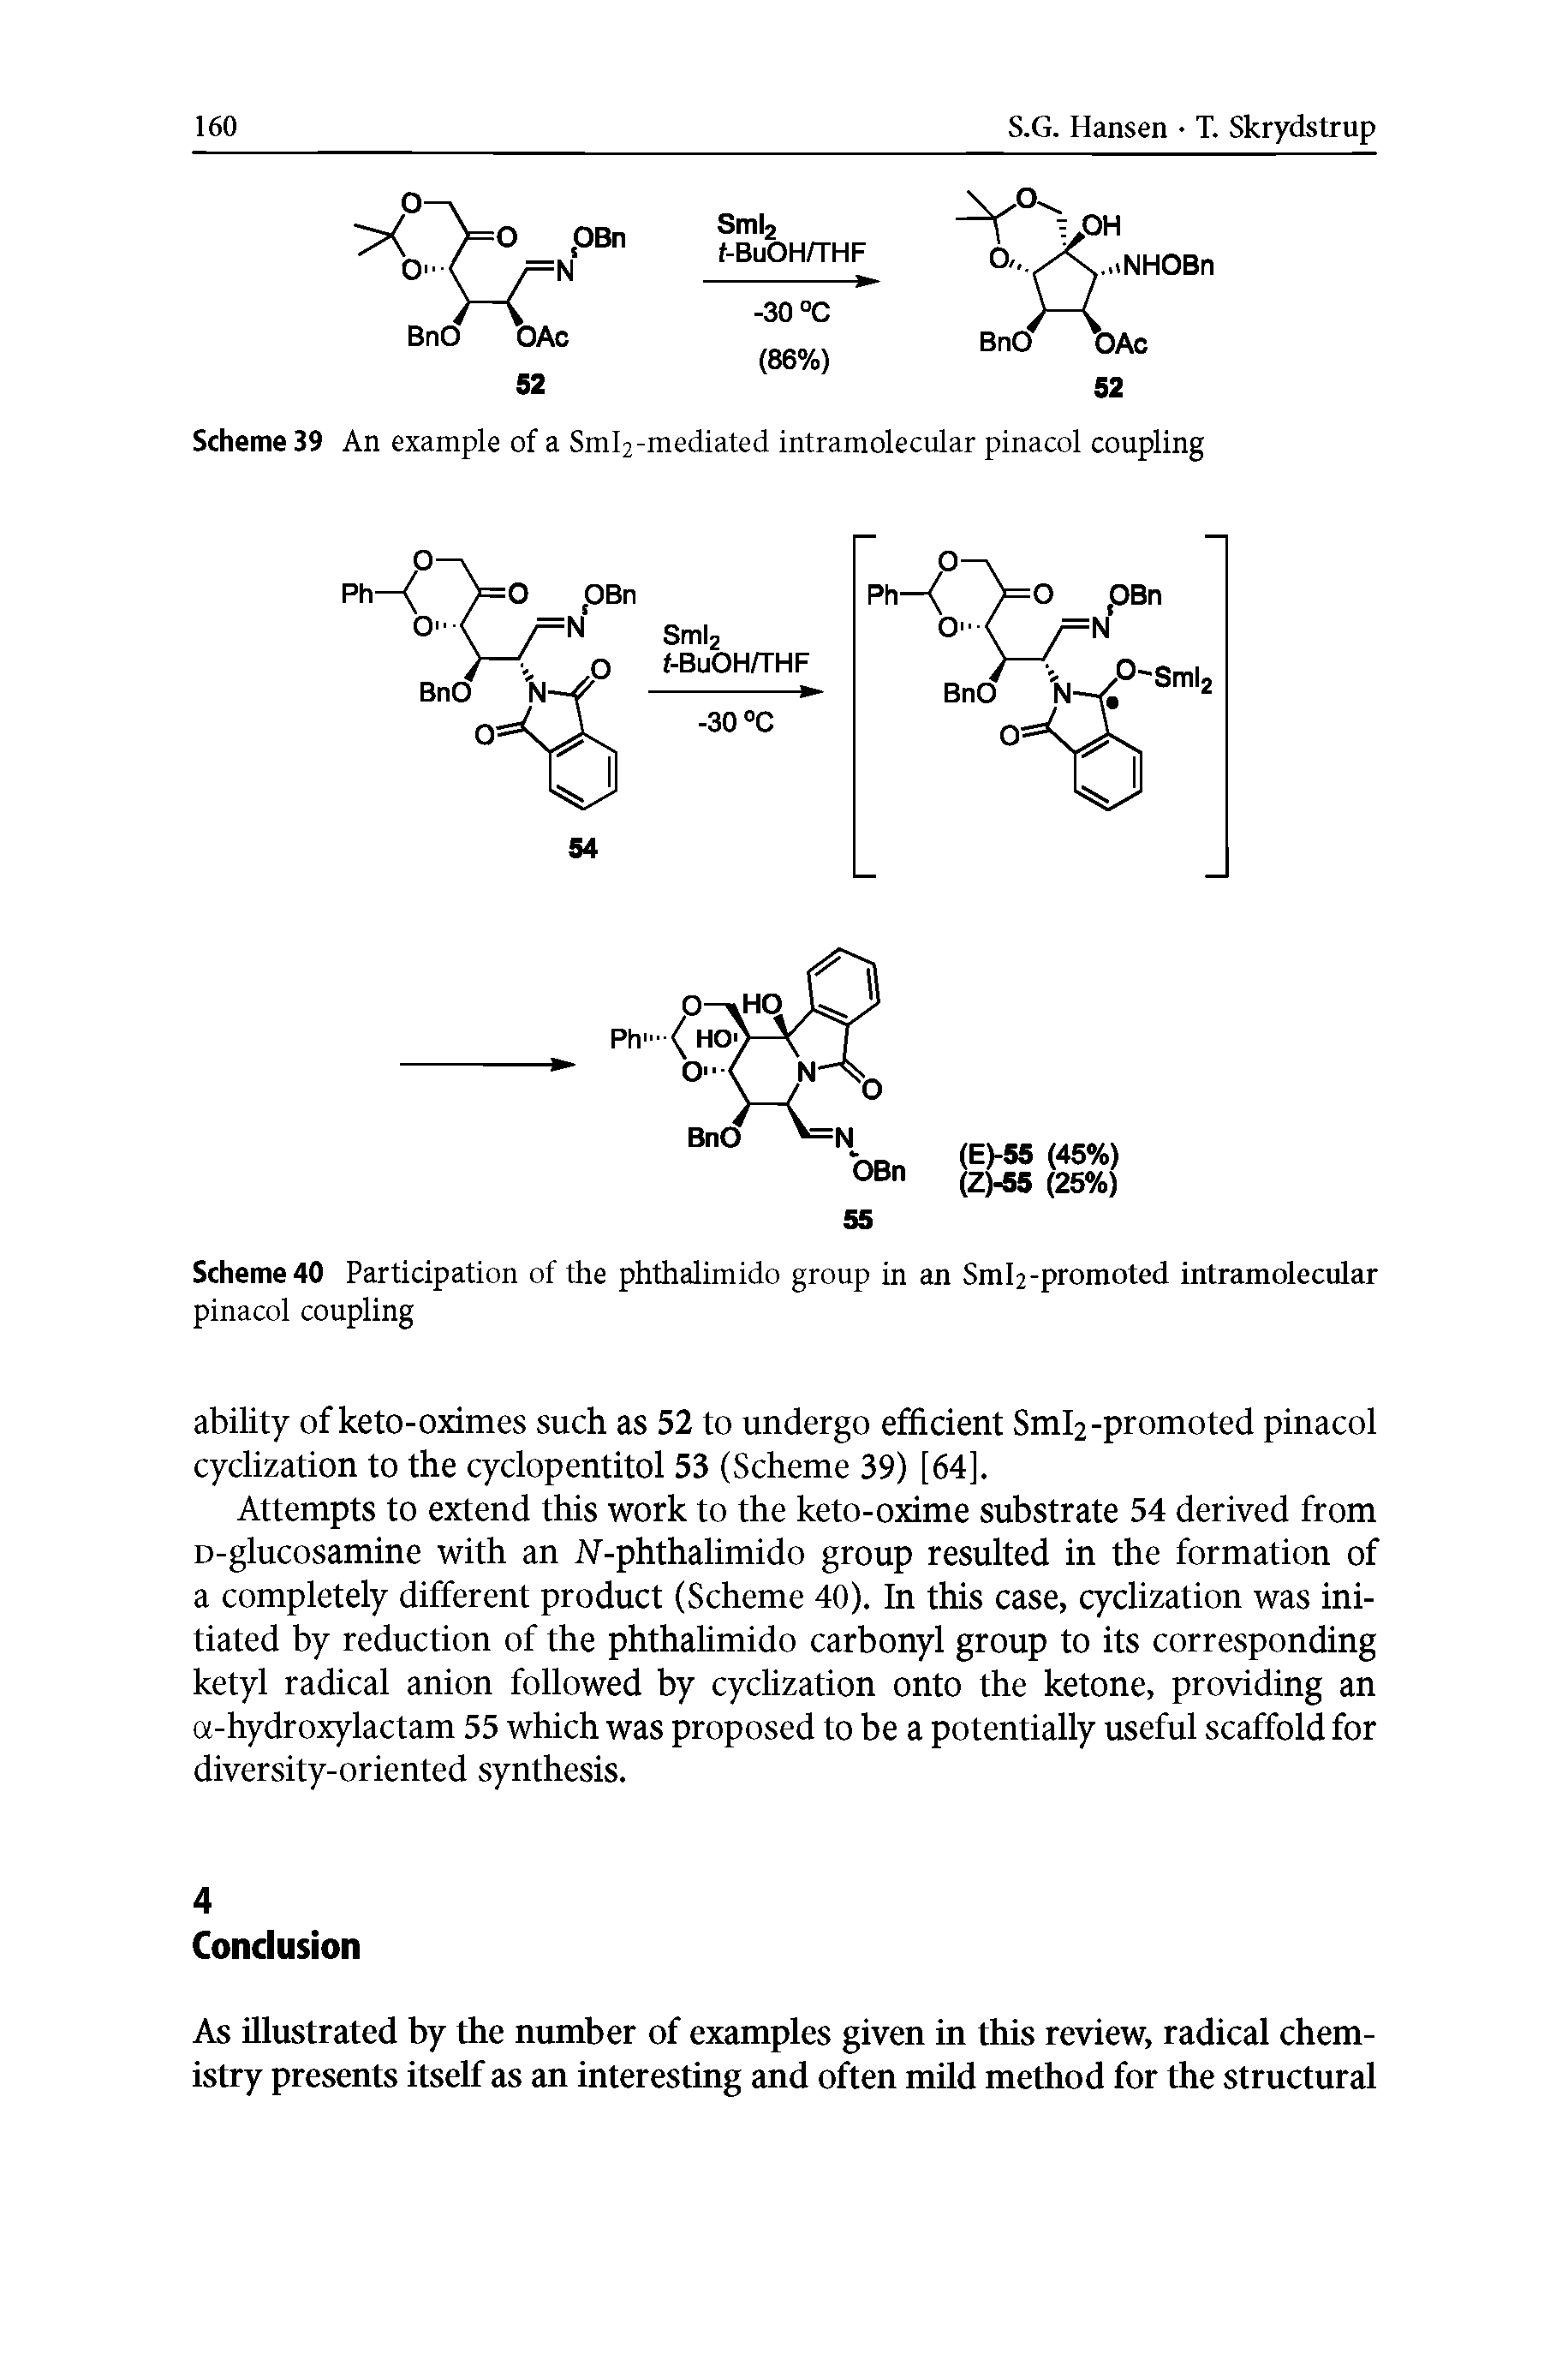 Scheme 39 An example of a Sml2-mediated intramolecular pinacol coupling...